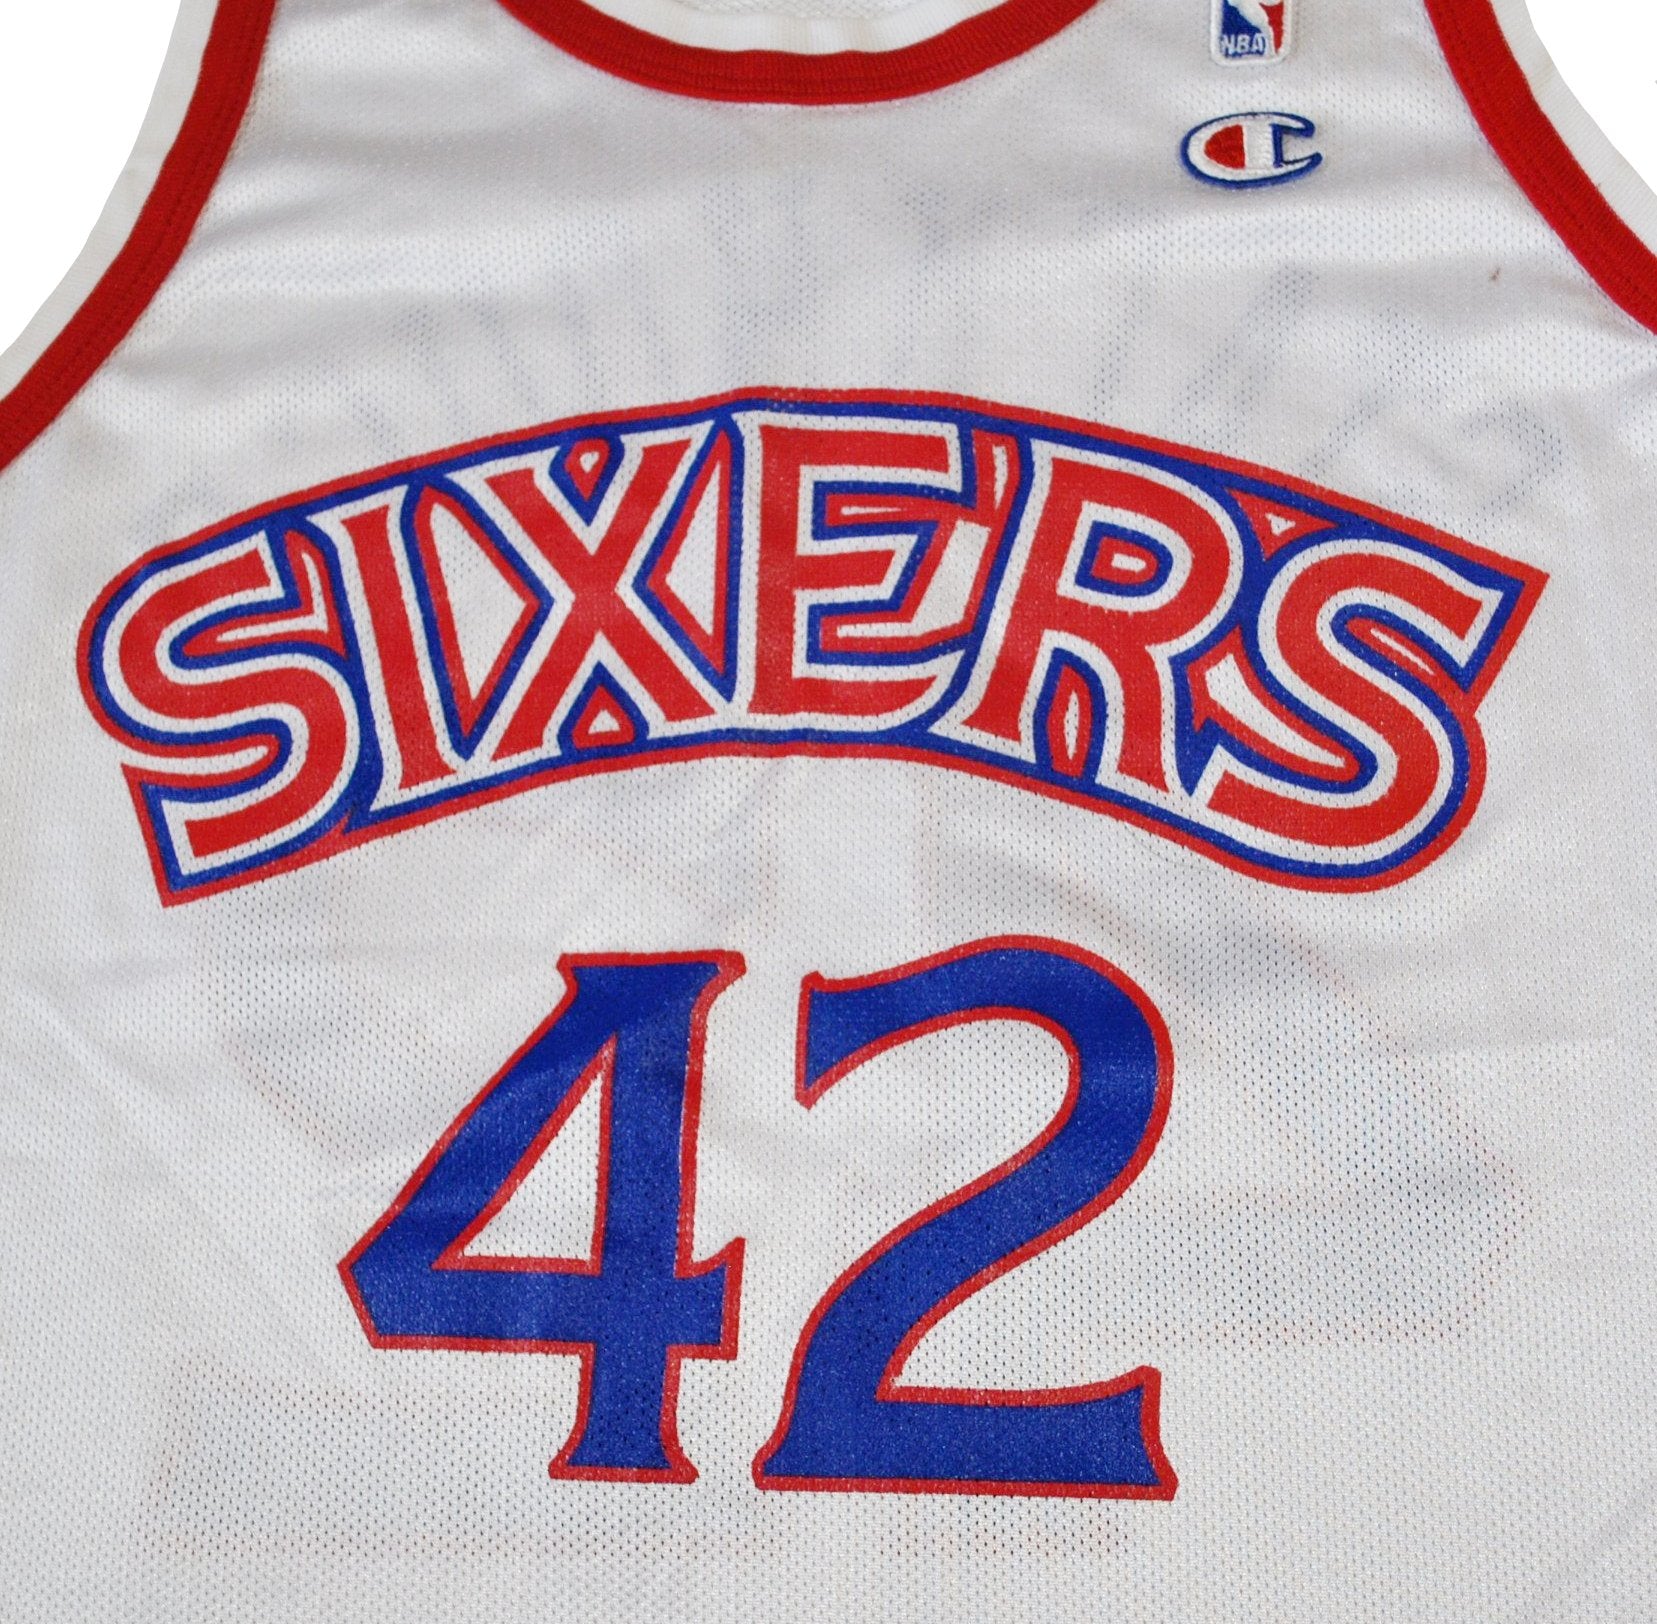 Philadelphia 76ers Vintage Clothing, 76ers Collection, 76ers